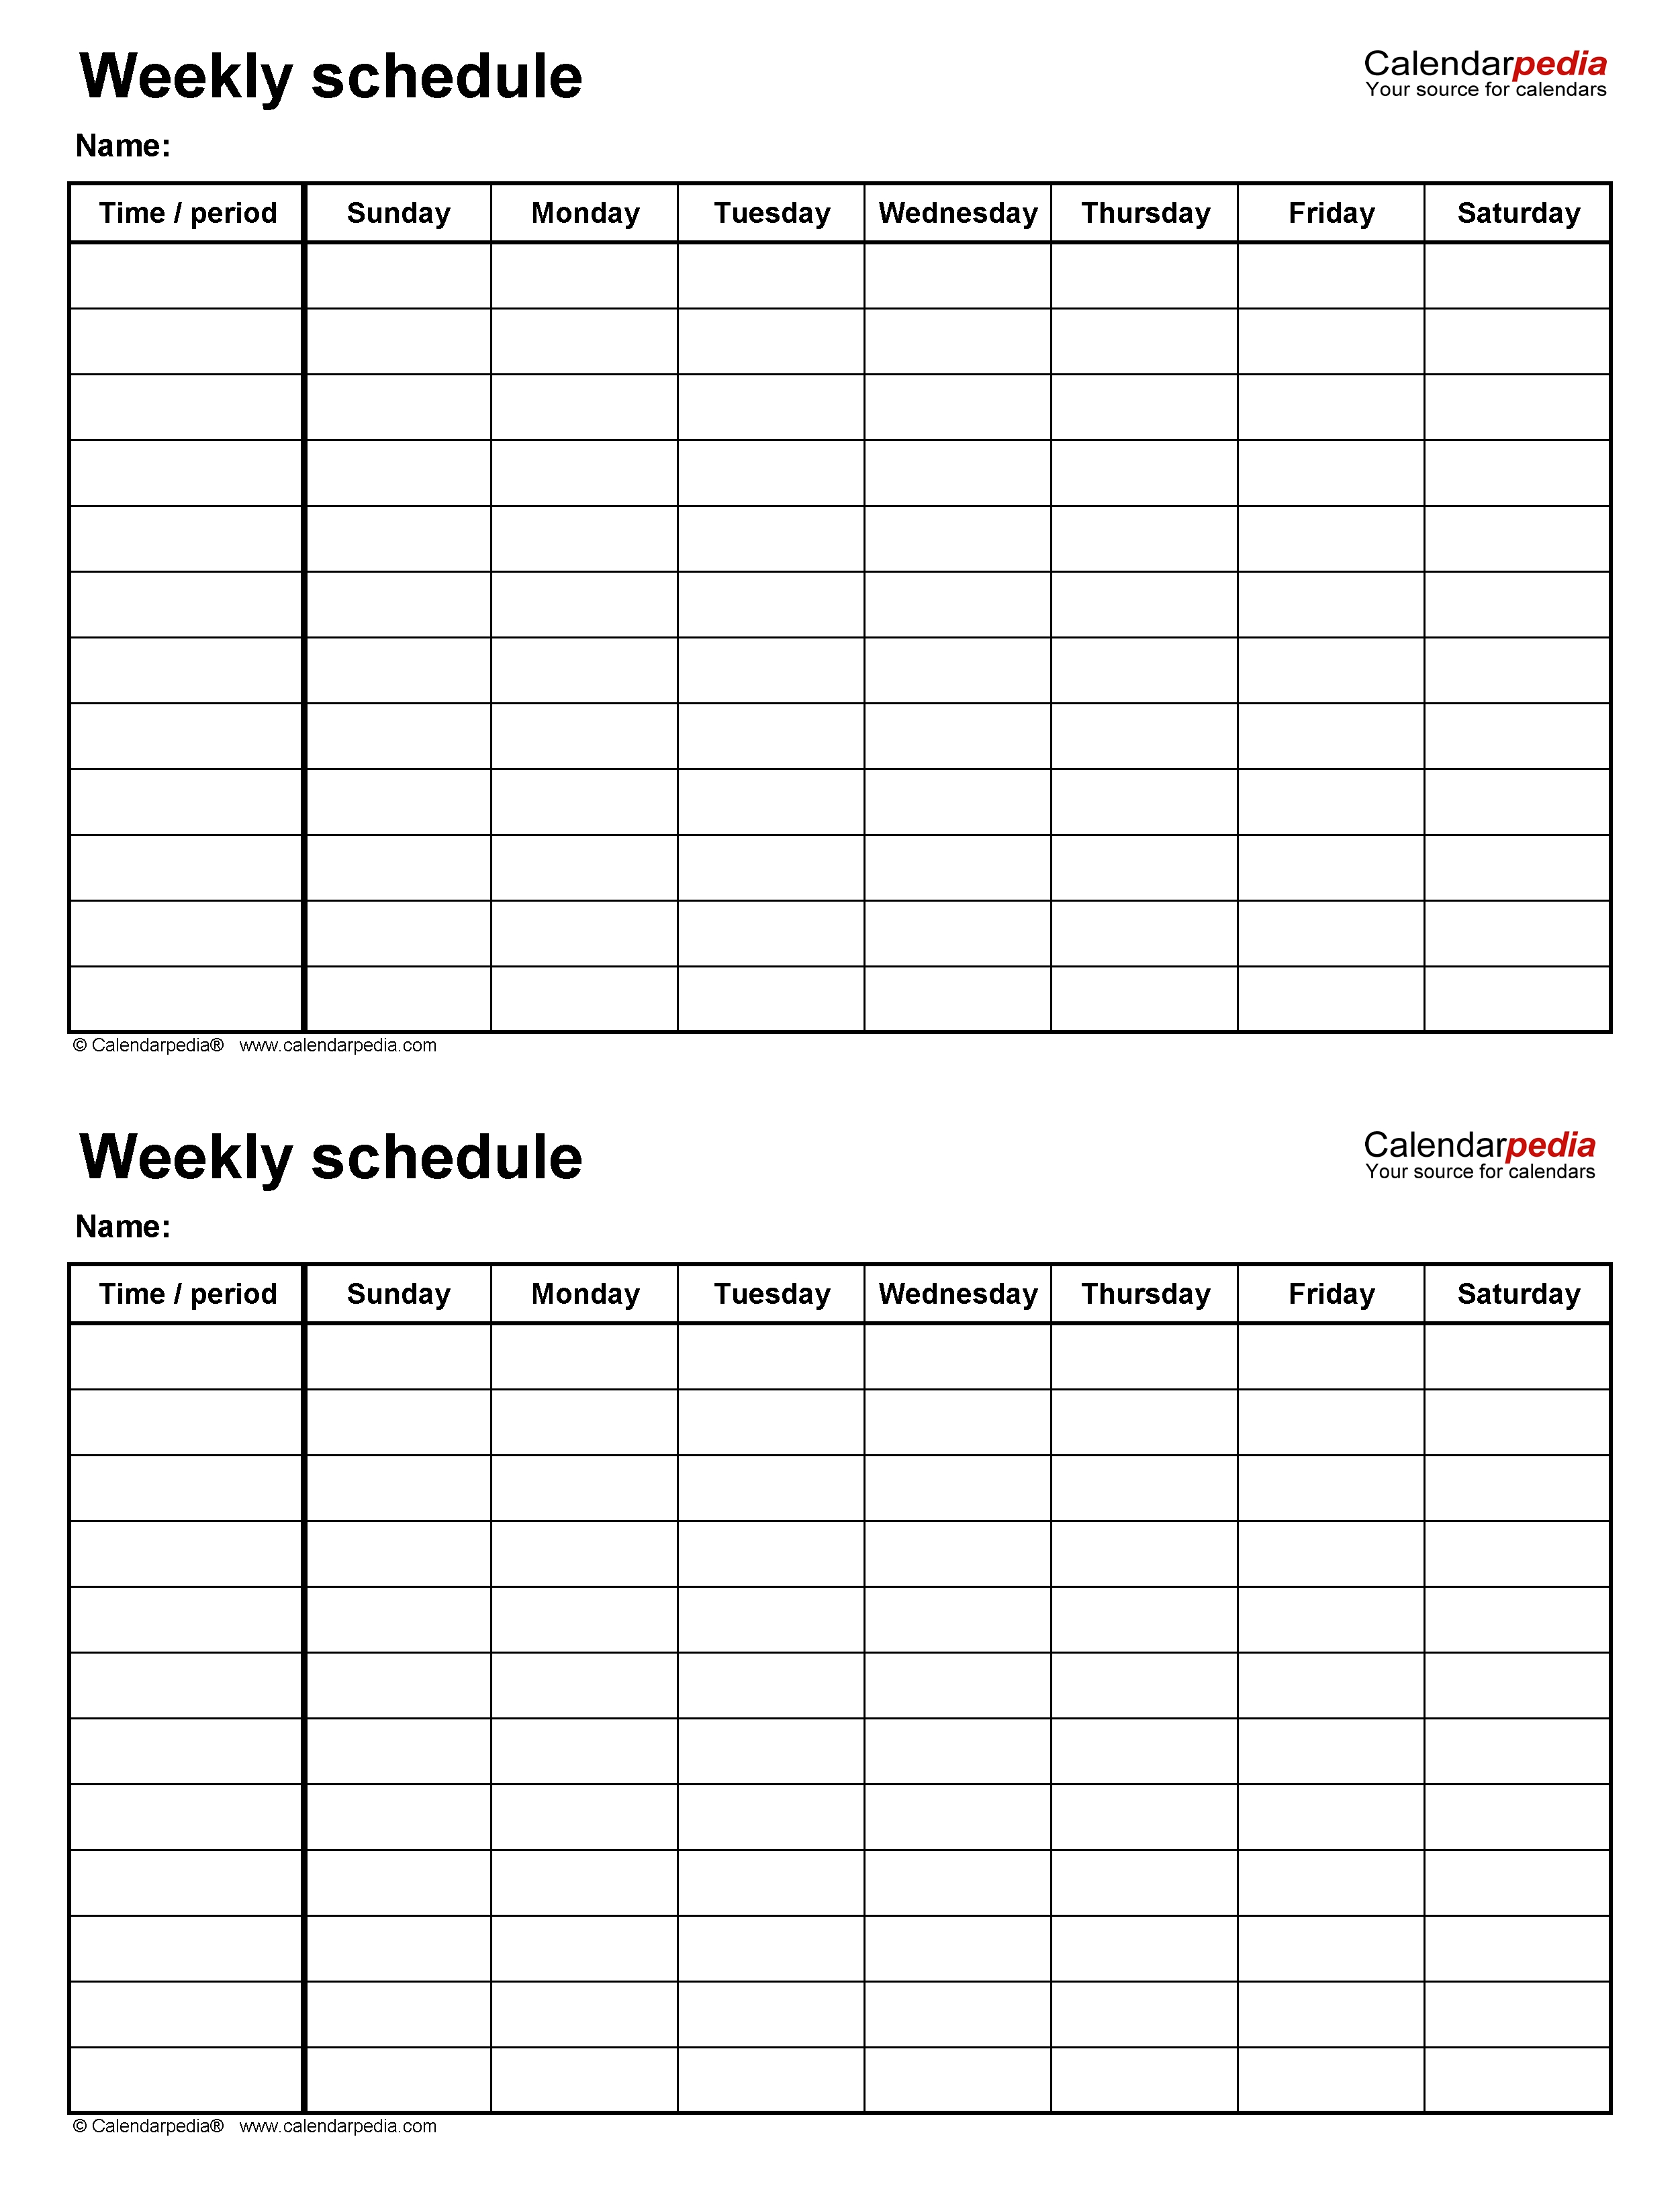 Free Weekly Schedules For Word - 18 Templates Free 7 Day Week Calendar Template